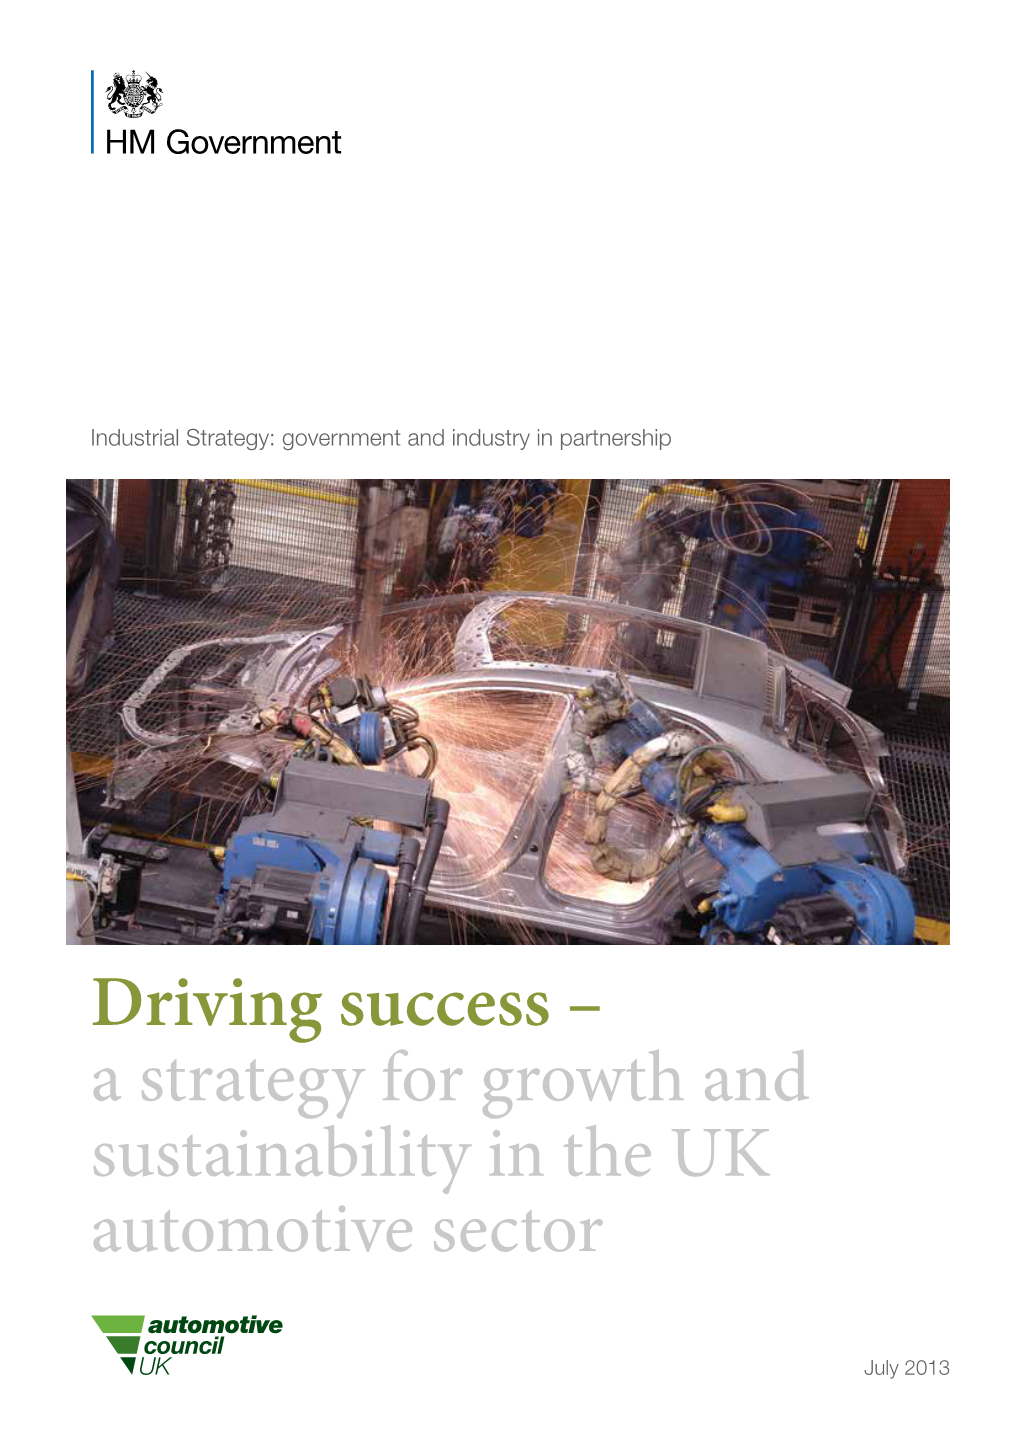 Driving Success – a Strategy for Growth and Sustainability in the UK Automotive Sector